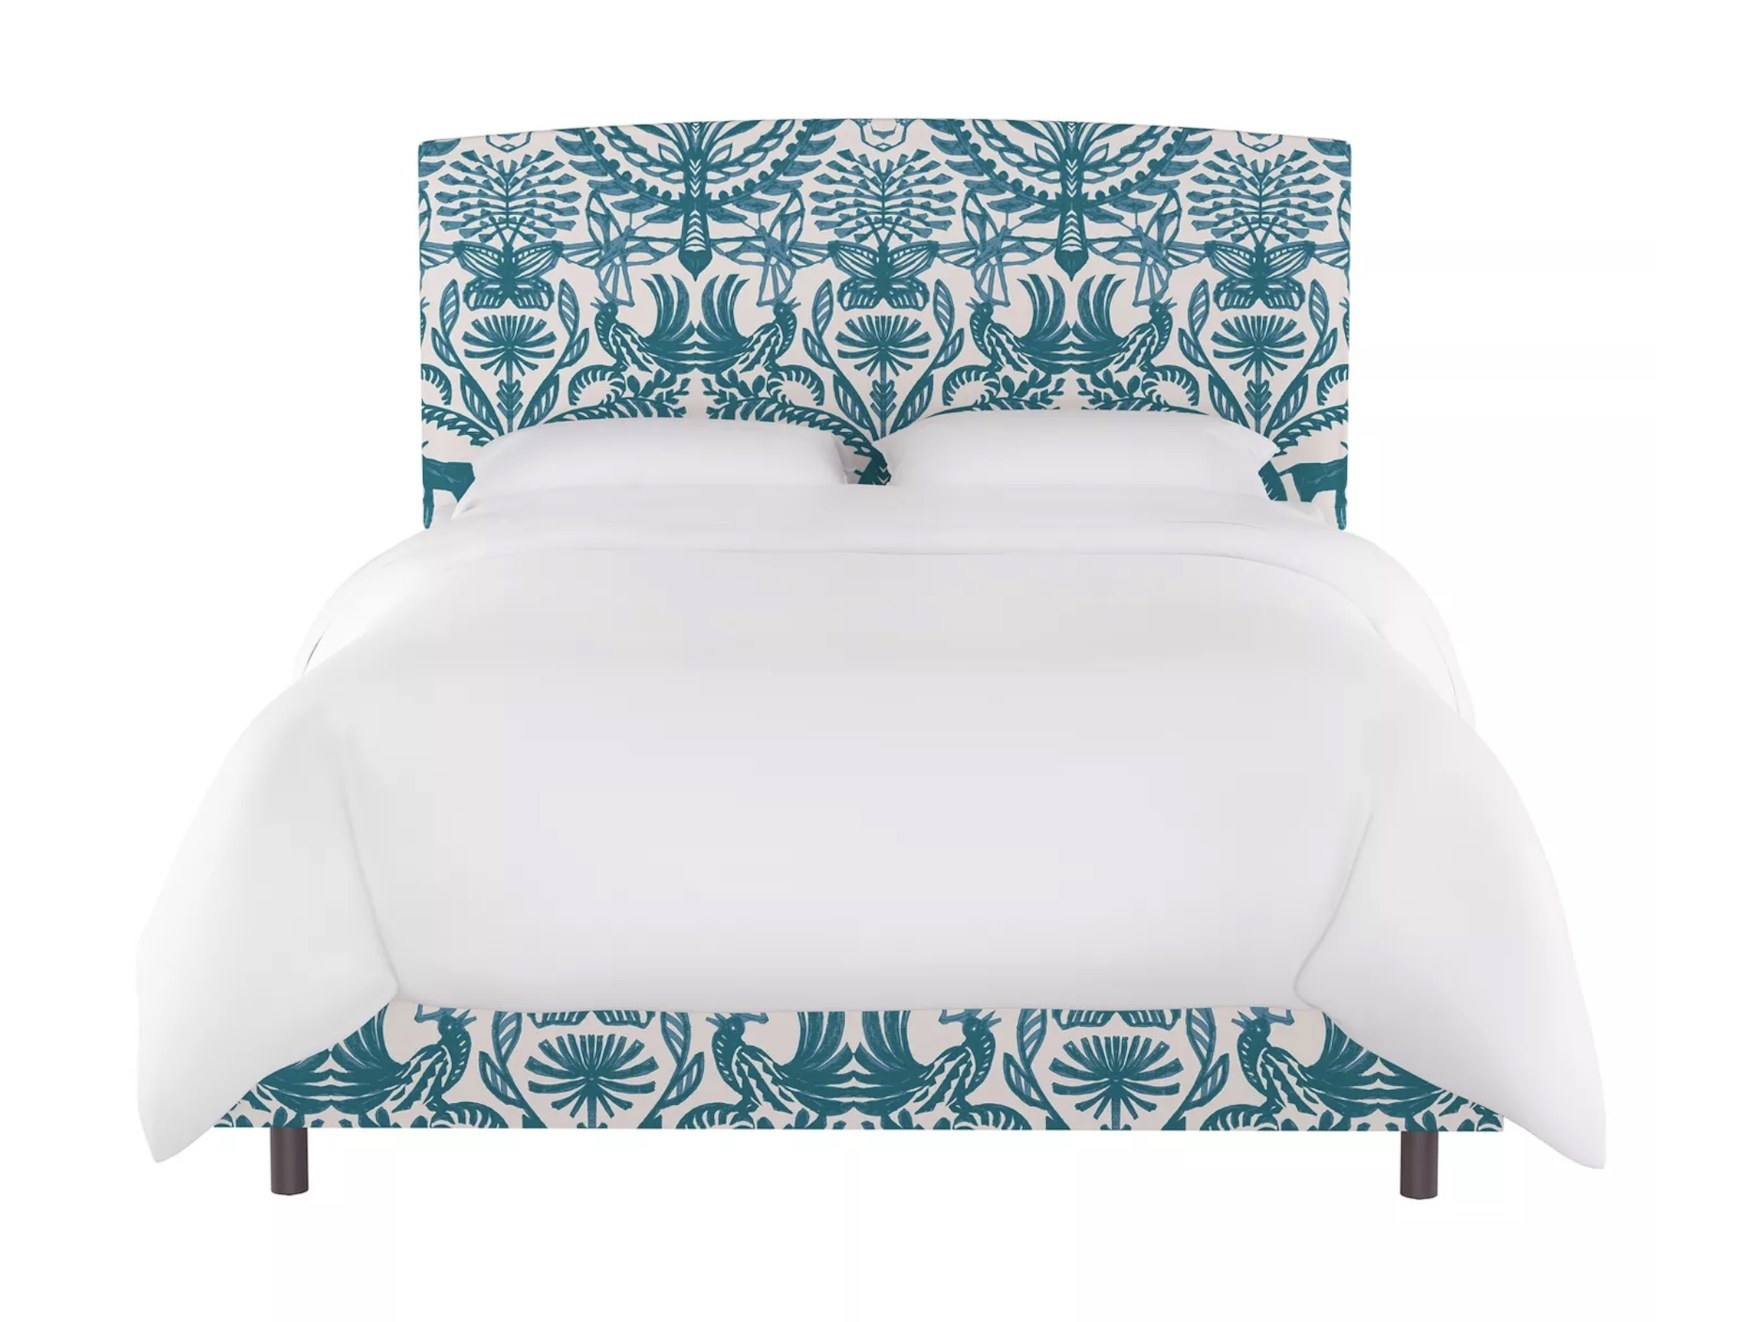 The upholstered bed